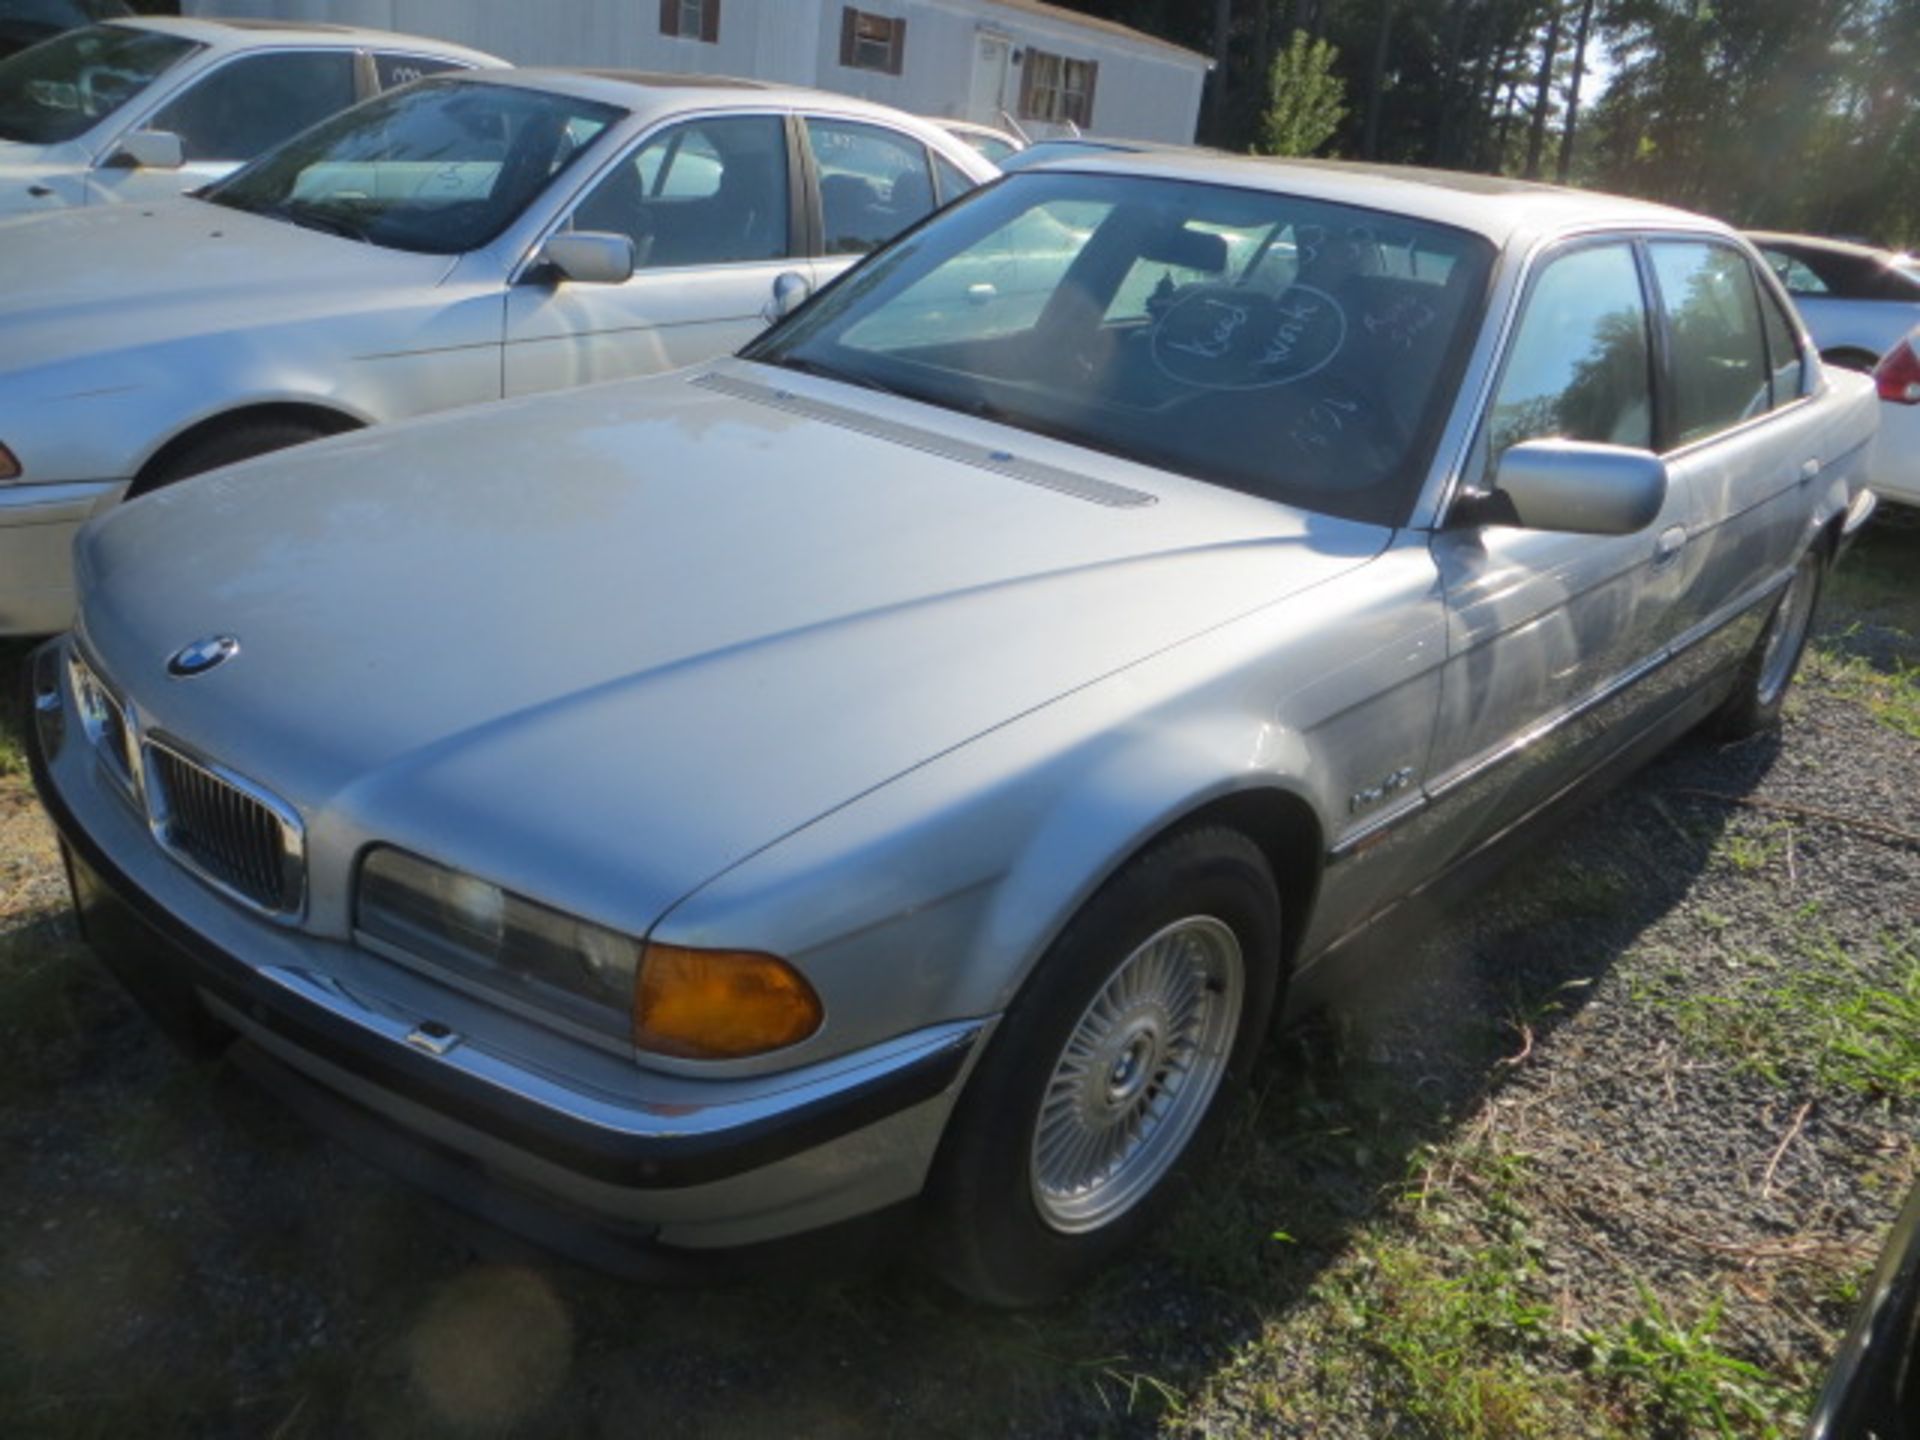 1998 BMW 750iL-NEEDS WORK-CRACKED SIDE GLASS 126000 MILES,VIN WBAGK232XWDH69608, SOLD WITH GOOD TRAN - Image 3 of 4